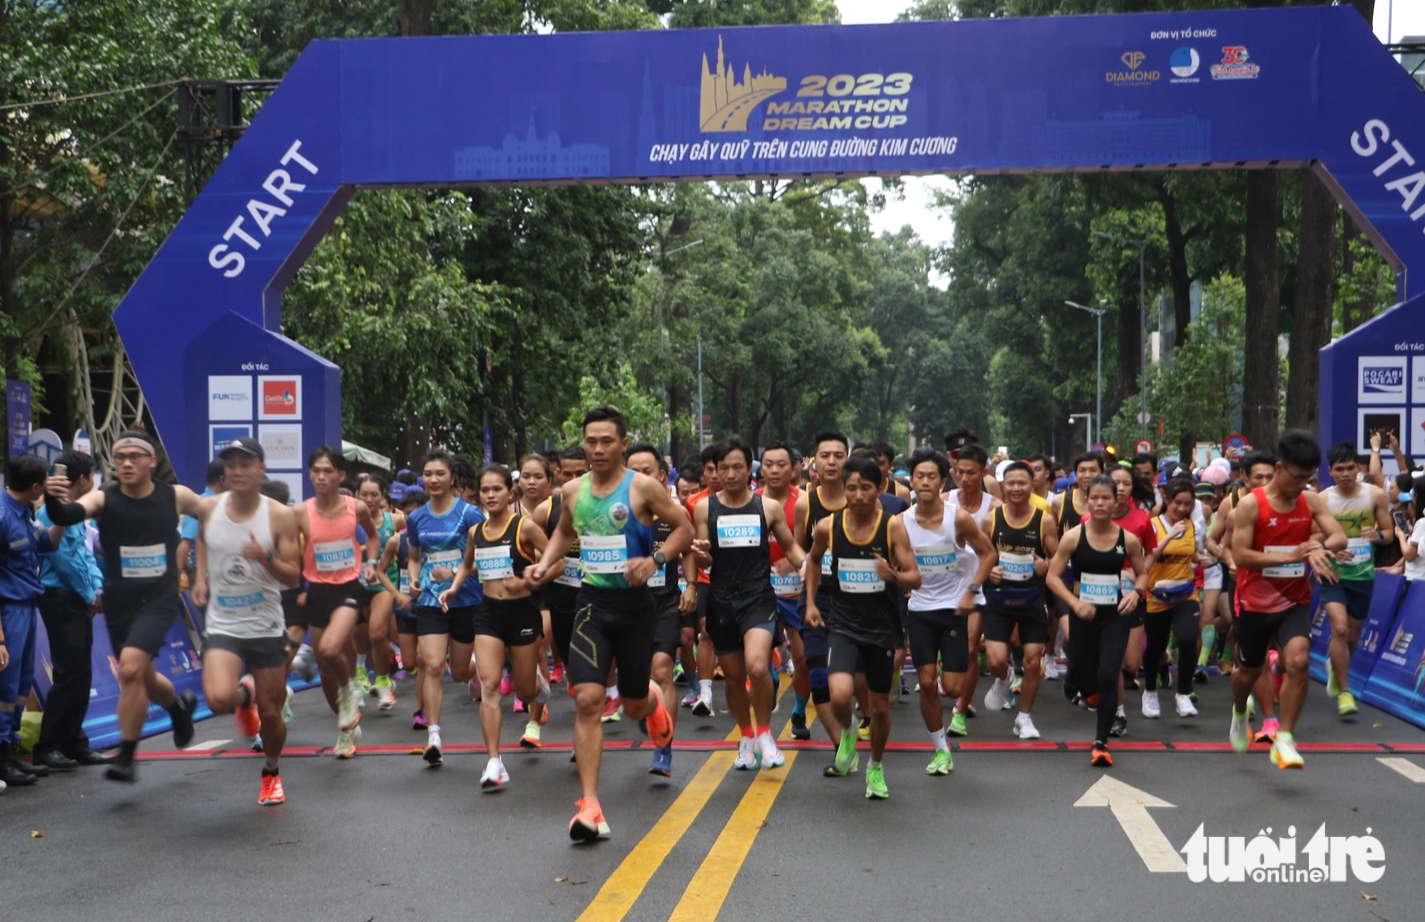 Ho Chi Minh City run attracts 2,000 participants to raise funds for needy